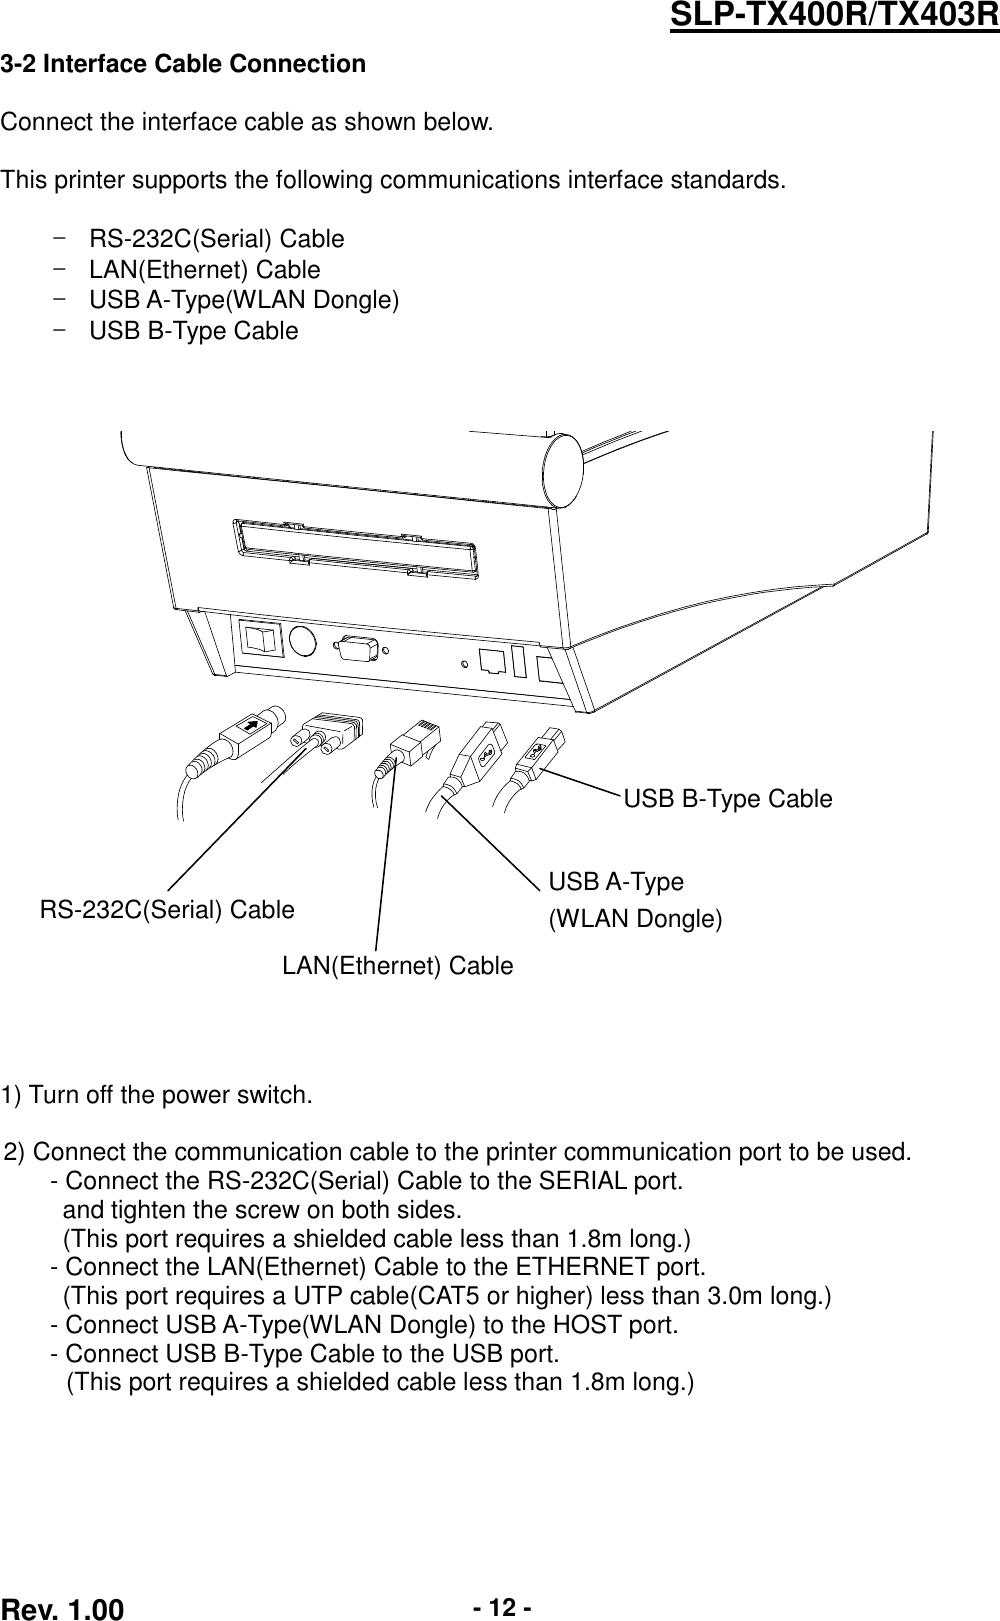  Rev. 1.00 - 12 - SLP-TX400R/TX403R 3-2 Interface Cable Connection  Connect the interface cable as shown below.  This printer supports the following communications interface standards.  - RS-232C(Serial) Cable -  LAN(Ethernet) Cable -  USB A-Type(WLAN Dongle) -  USB B-Type Cable                   1) Turn off the power switch.  2) Connect the communication cable to the printer communication port to be used. - Connect the RS-232C(Serial) Cable to the SERIAL port. and tighten the screw on both sides. (This port requires a shielded cable less than 1.8m long.) - Connect the LAN(Ethernet) Cable to the ETHERNET port. (This port requires a UTP cable(CAT5 or higher) less than 3.0m long.) - Connect USB A-Type(WLAN Dongle) to the HOST port. - Connect USB B-Type Cable to the USB port.      (This port requires a shielded cable less than 1.8m long.)  USB B-Type Cable RS-232C(Serial) Cable LAN(Ethernet) Cable USB A-Type (WLAN Dongle) 